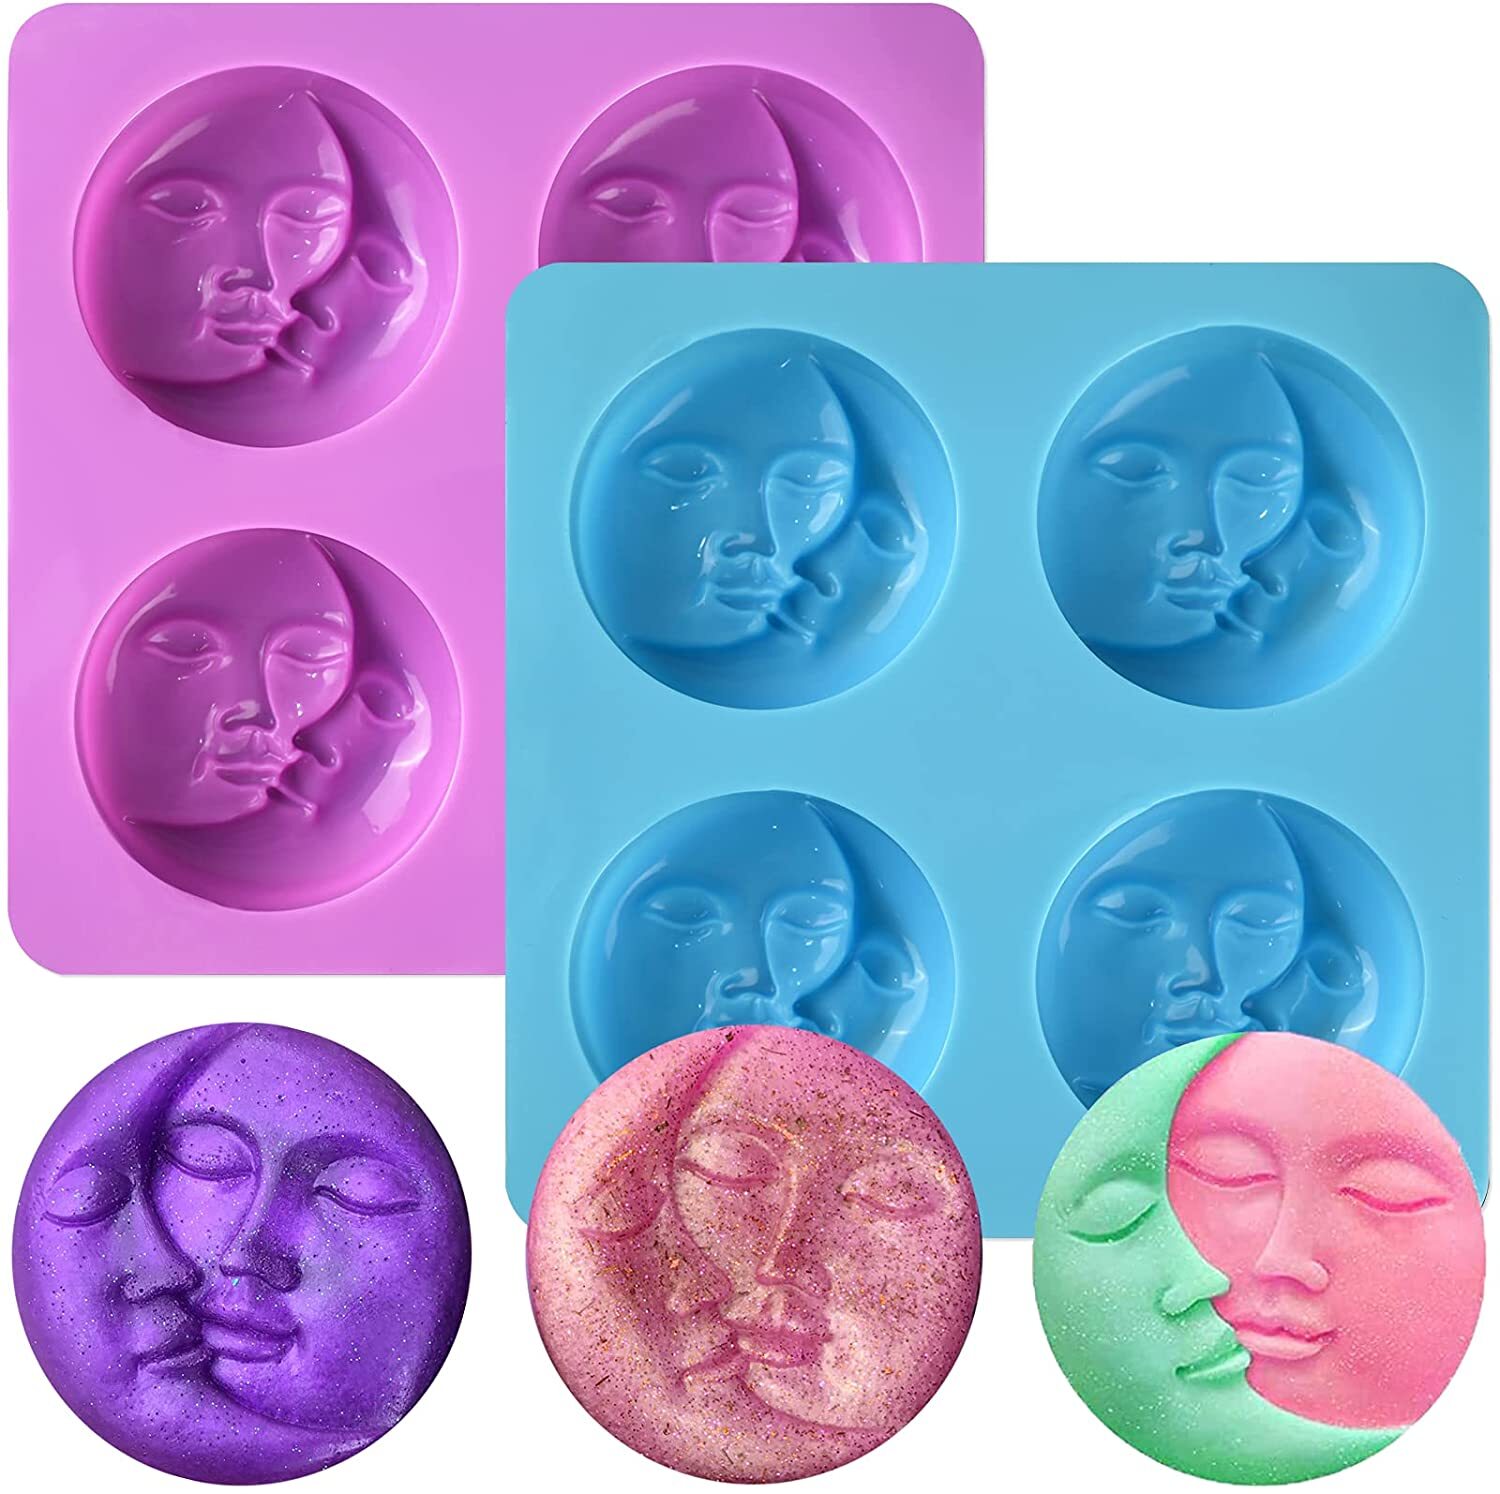 Sun & Moon Faces Silicone Soap Molds Craft Mold DIY Handmade Soap Mould Tool Kit 